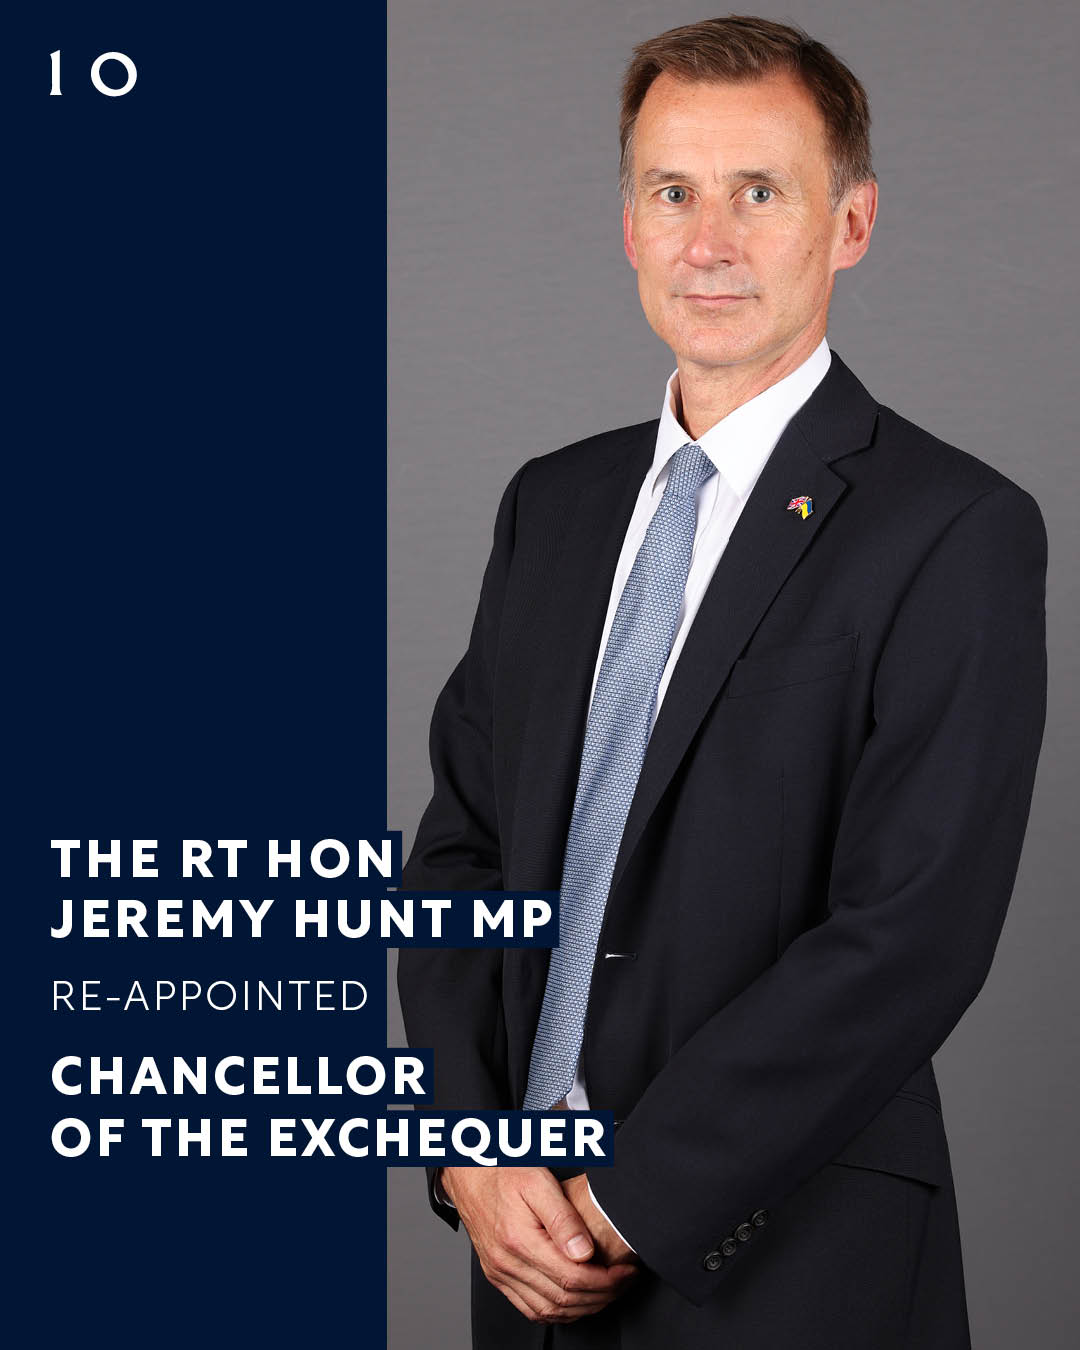 The Rt Hon Jeremy Hunt MP @Jeremy_Hunt has been re-appointed Chancellor of the Exchequer @HMTreasury . 